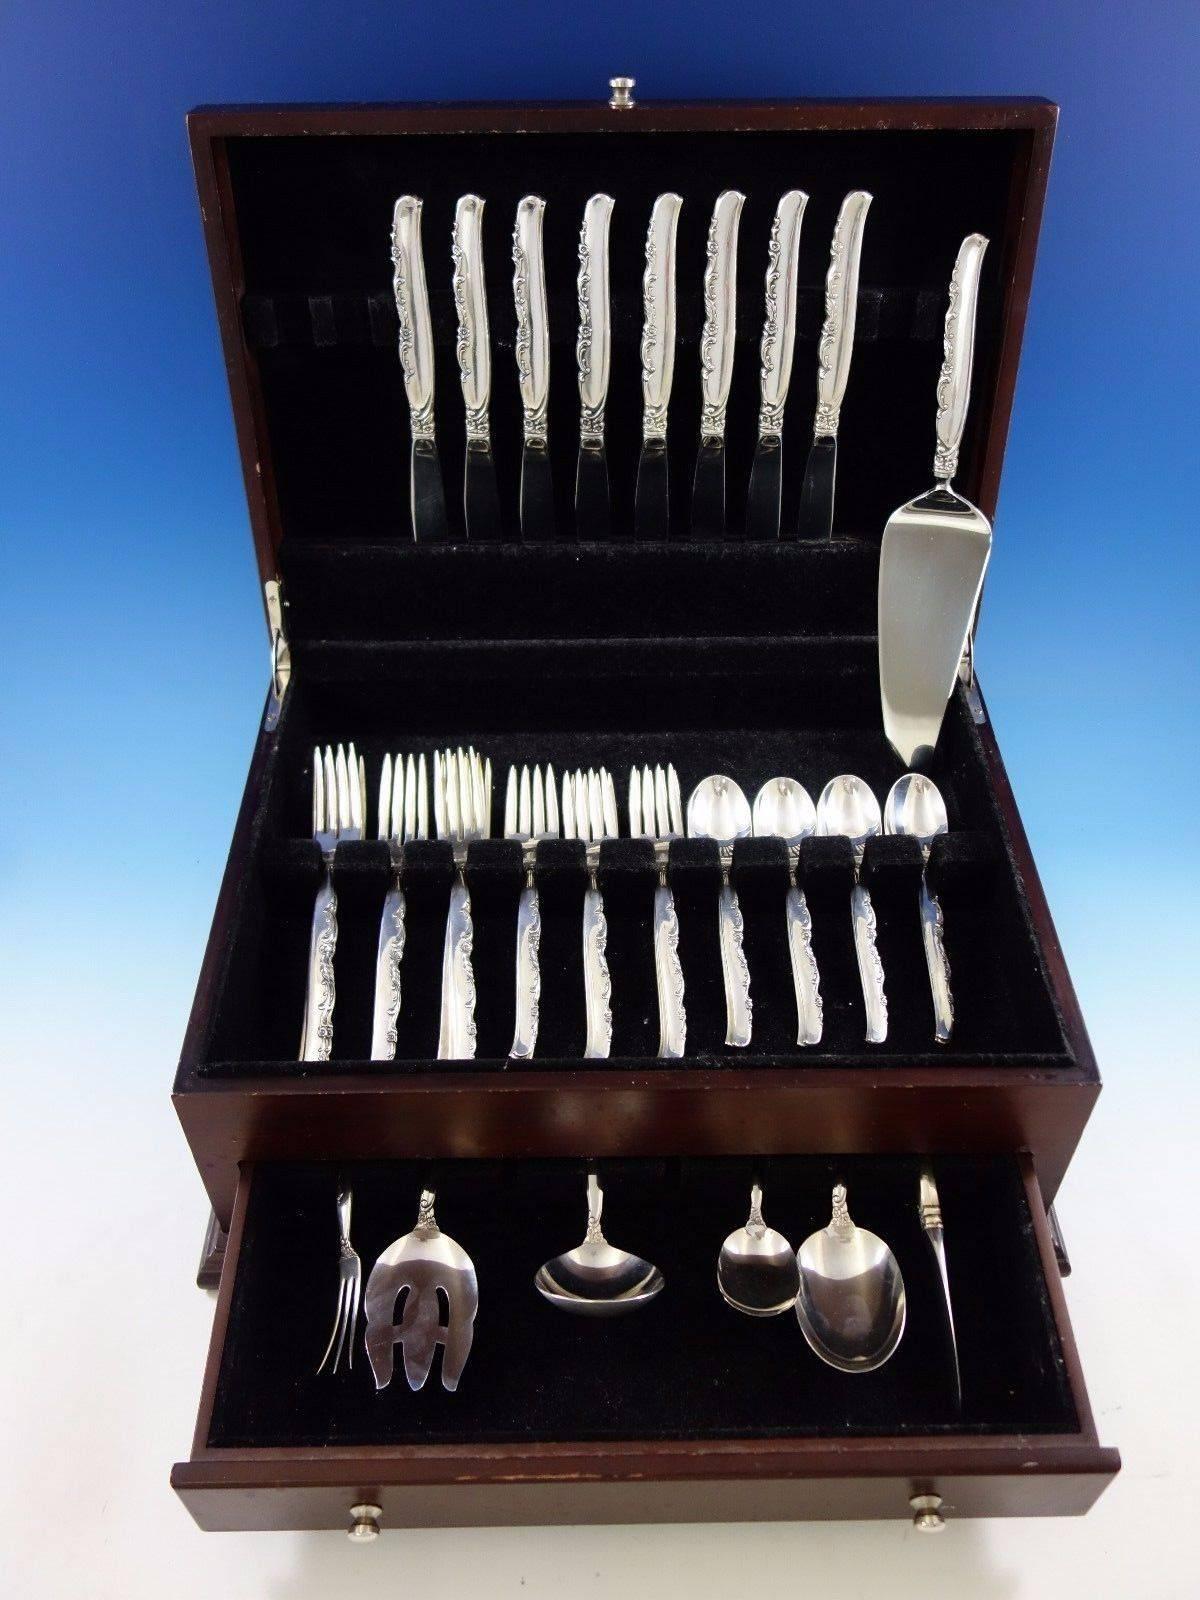 Flower lane by Oneida sterling silver flatware set with pierced handle, 39 pieces. This set includes: 

eight knives, 8 7/8